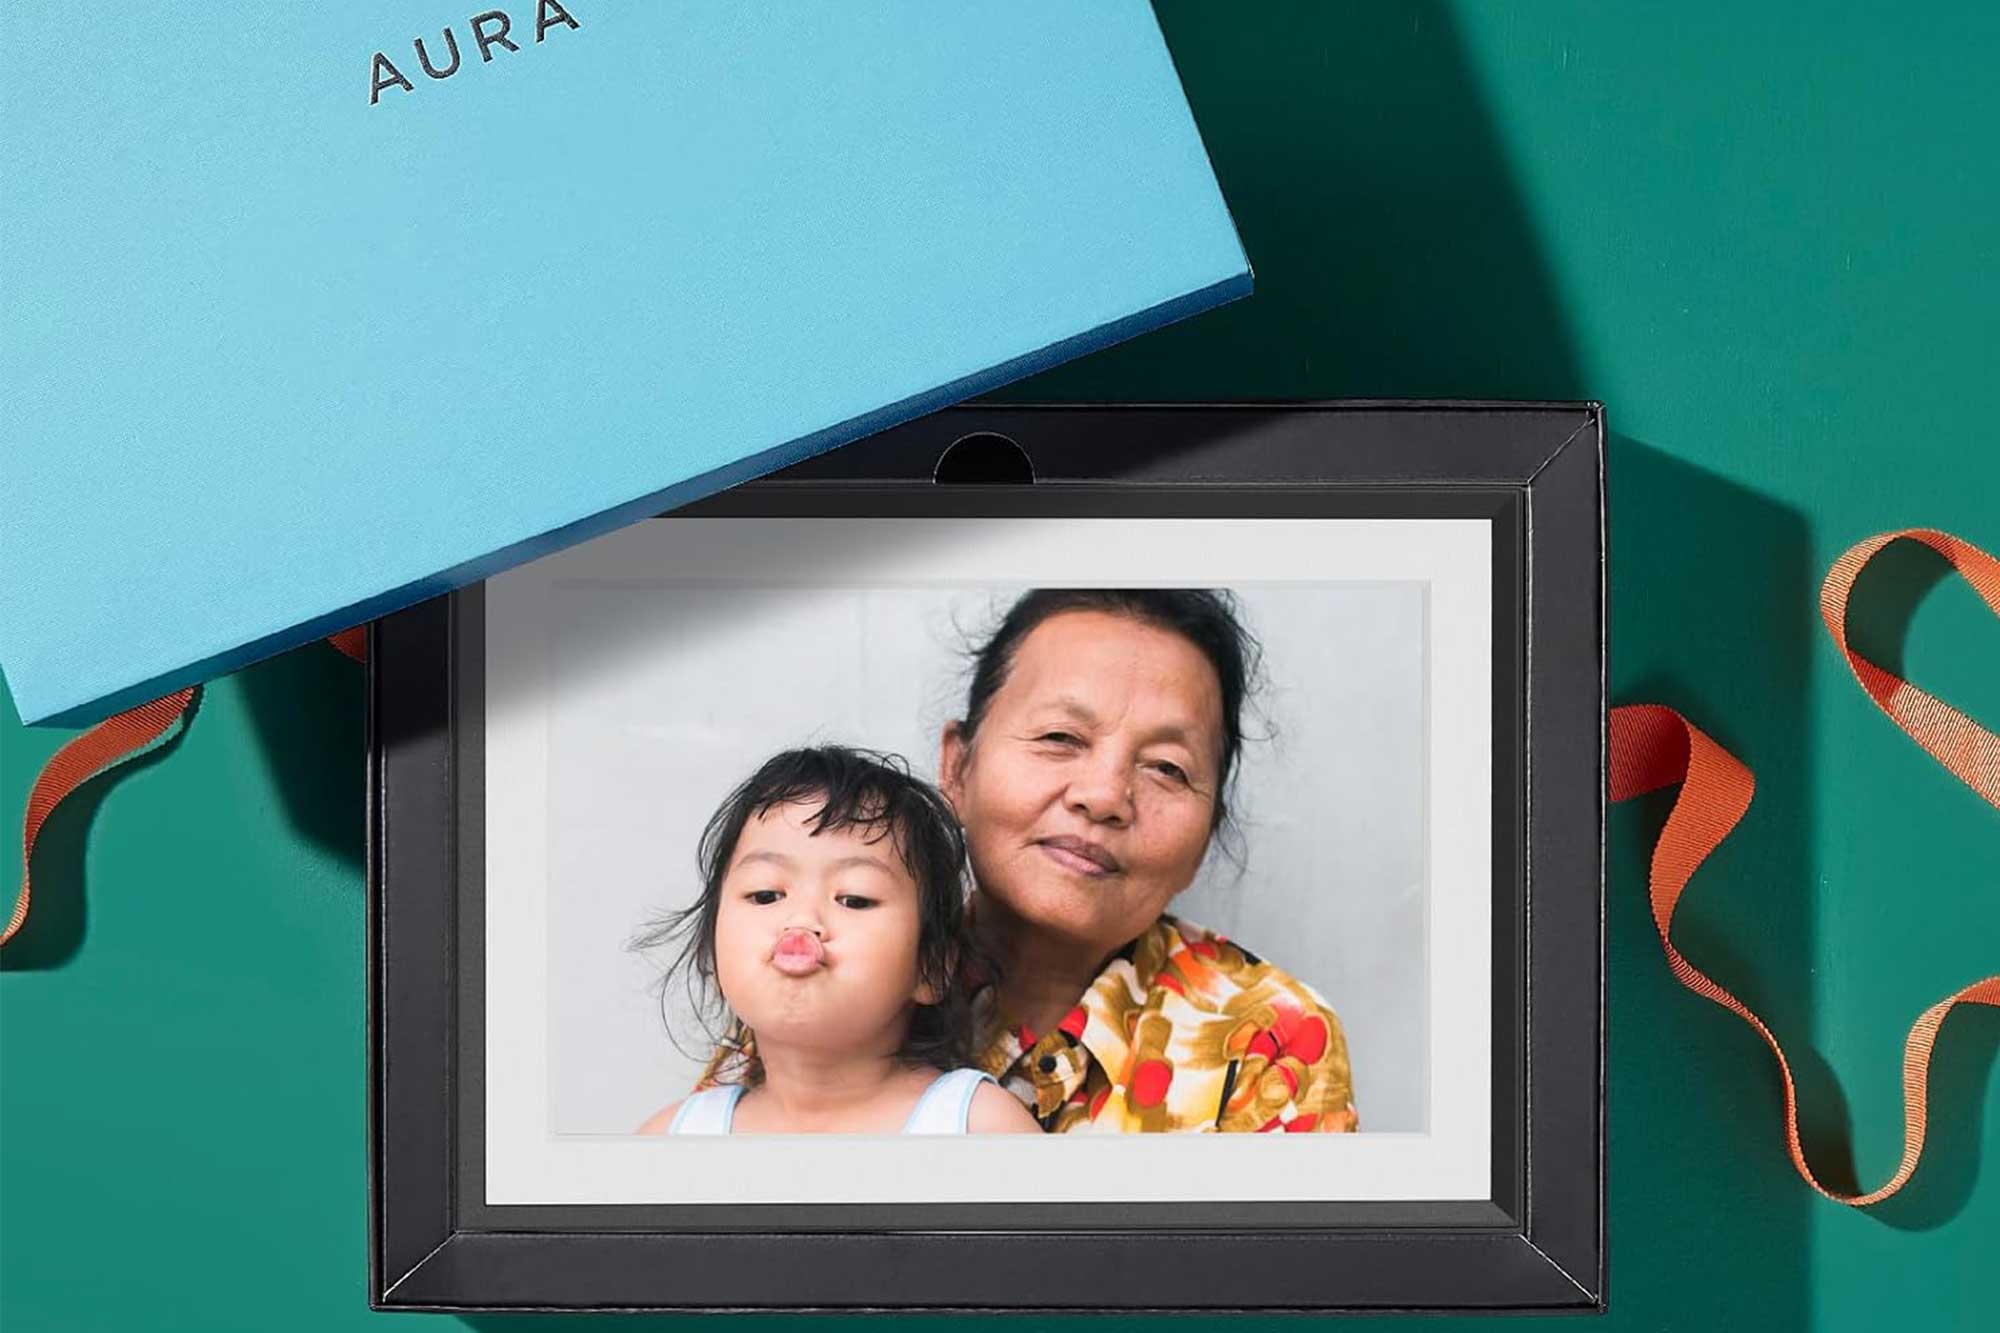 This Aura digital picture frame is a great last-minute Mother’s Day deal